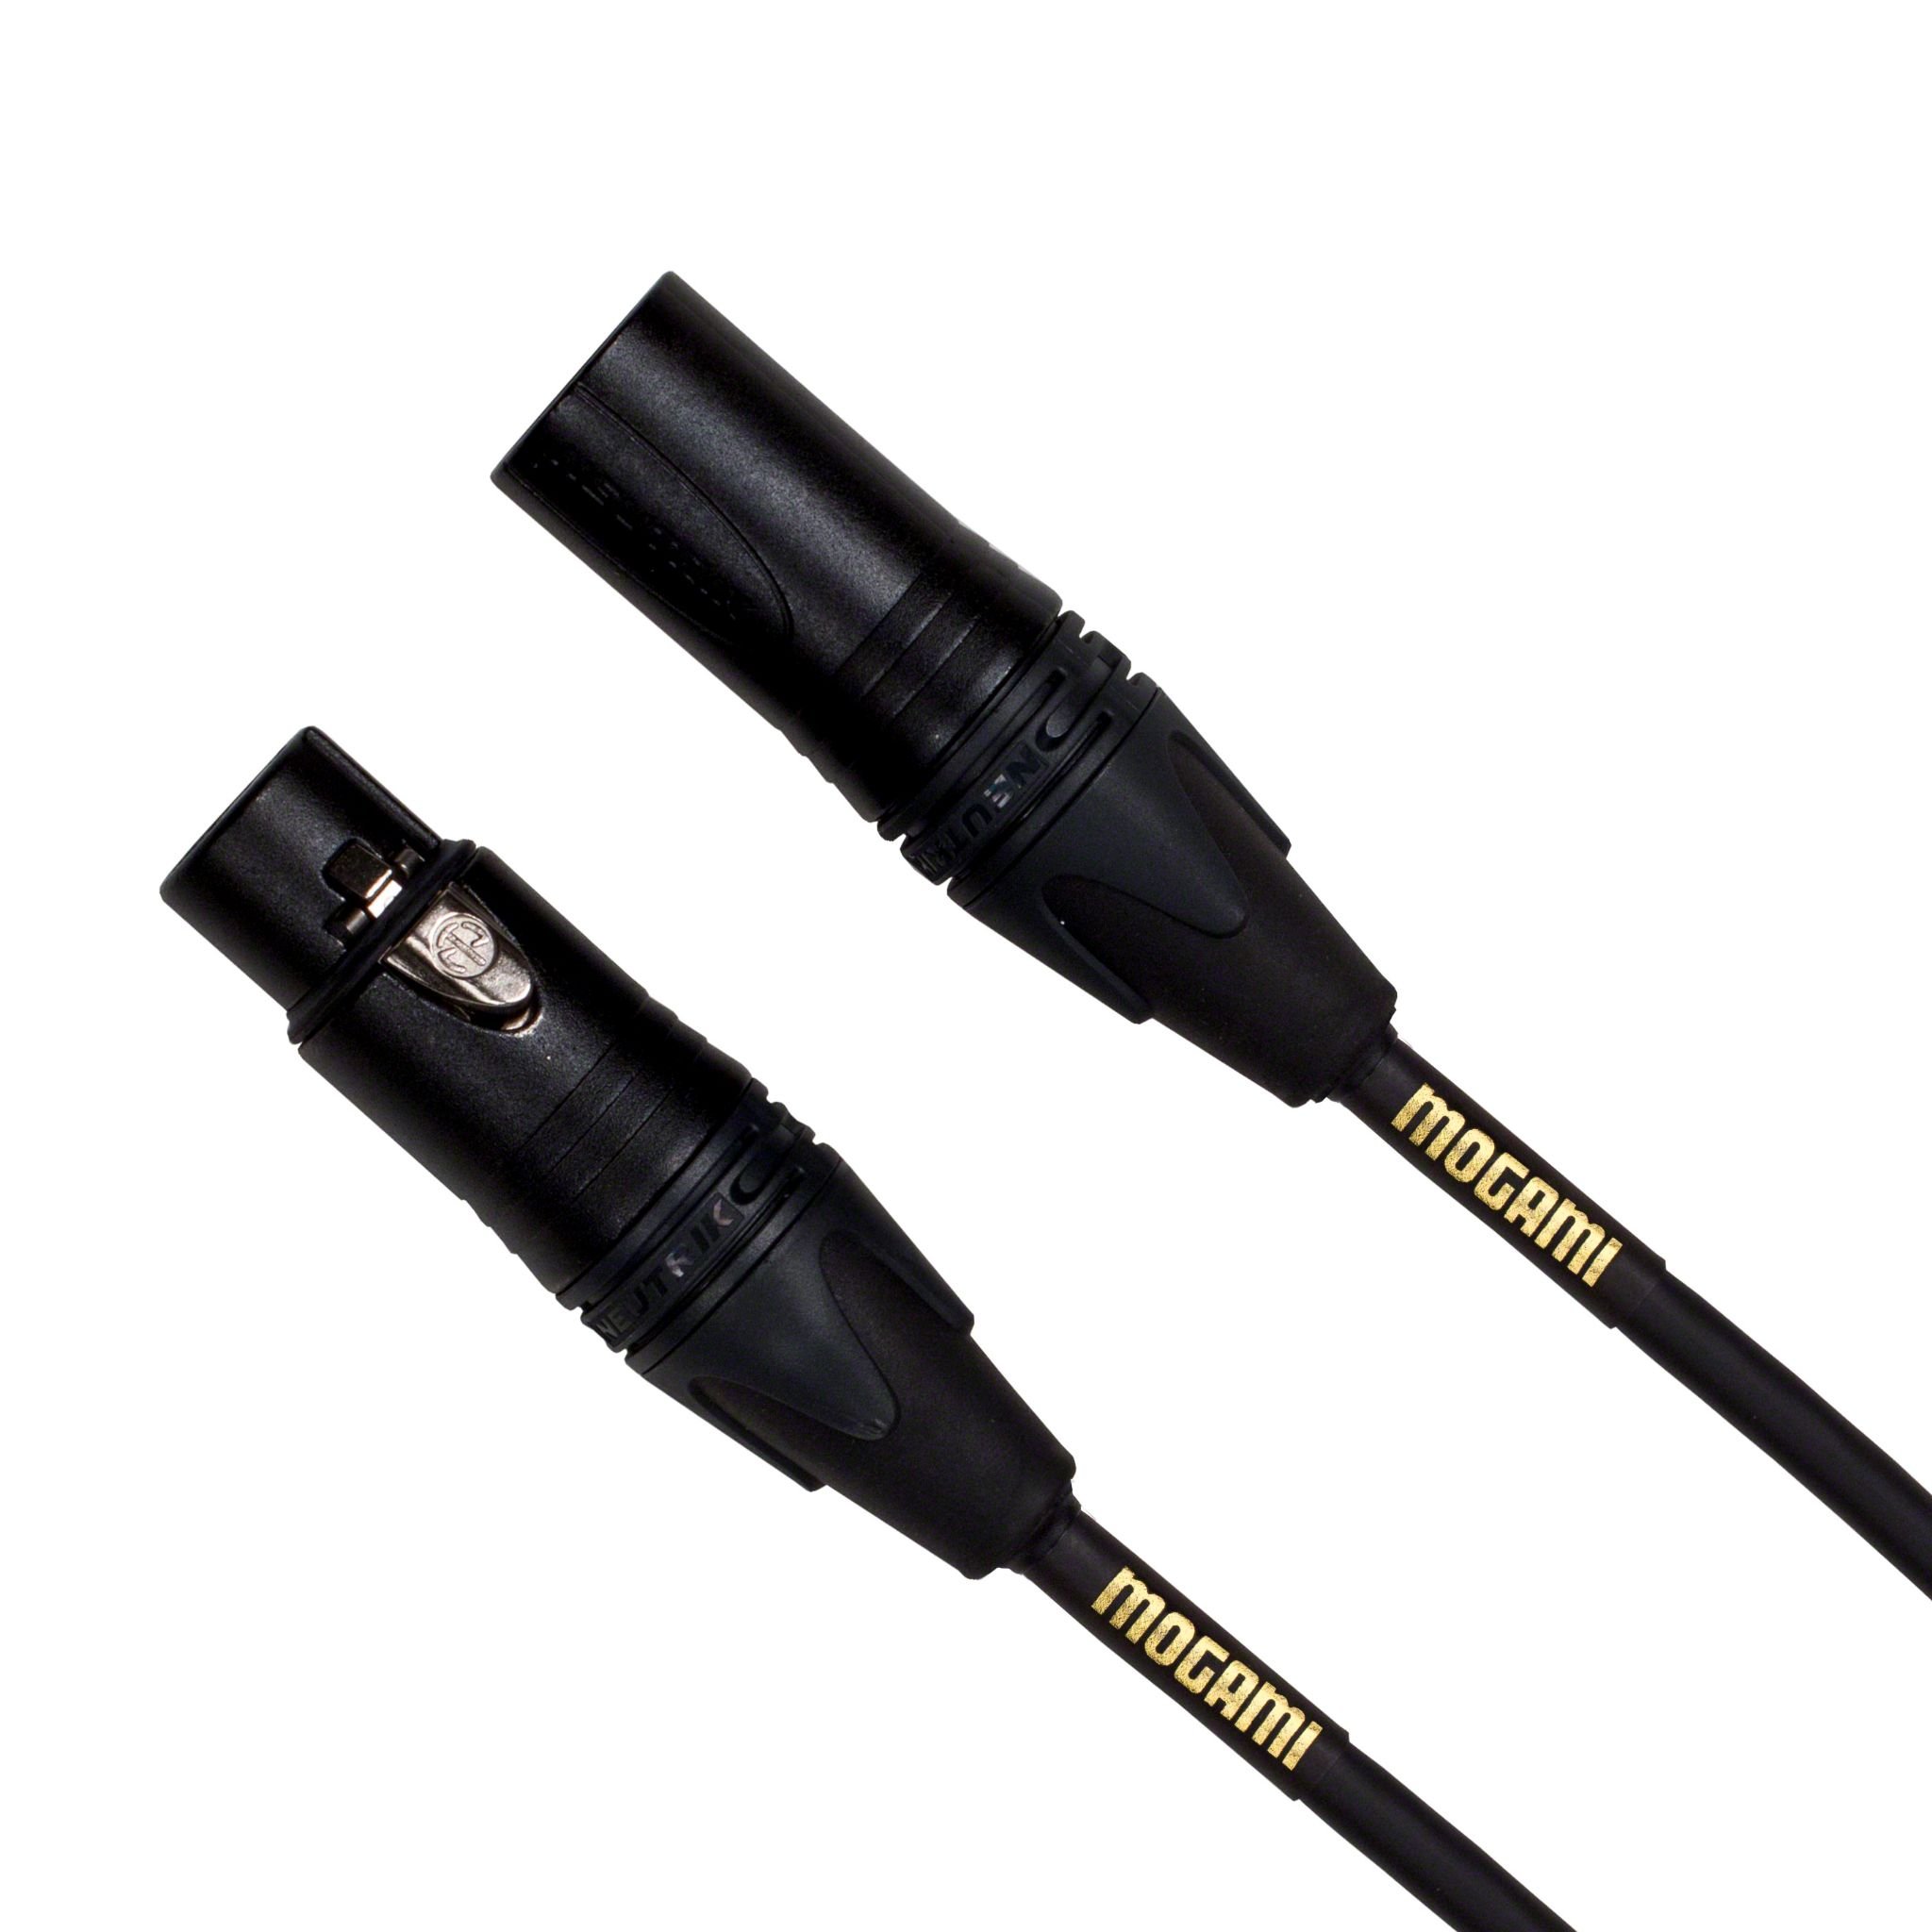 Mogami Gold STUDIO-100 XLR Microphone Cable, XLR-Female to XLR-Male, 3-Pin, Gold Contacts, Straight Connectors, 100 Foot